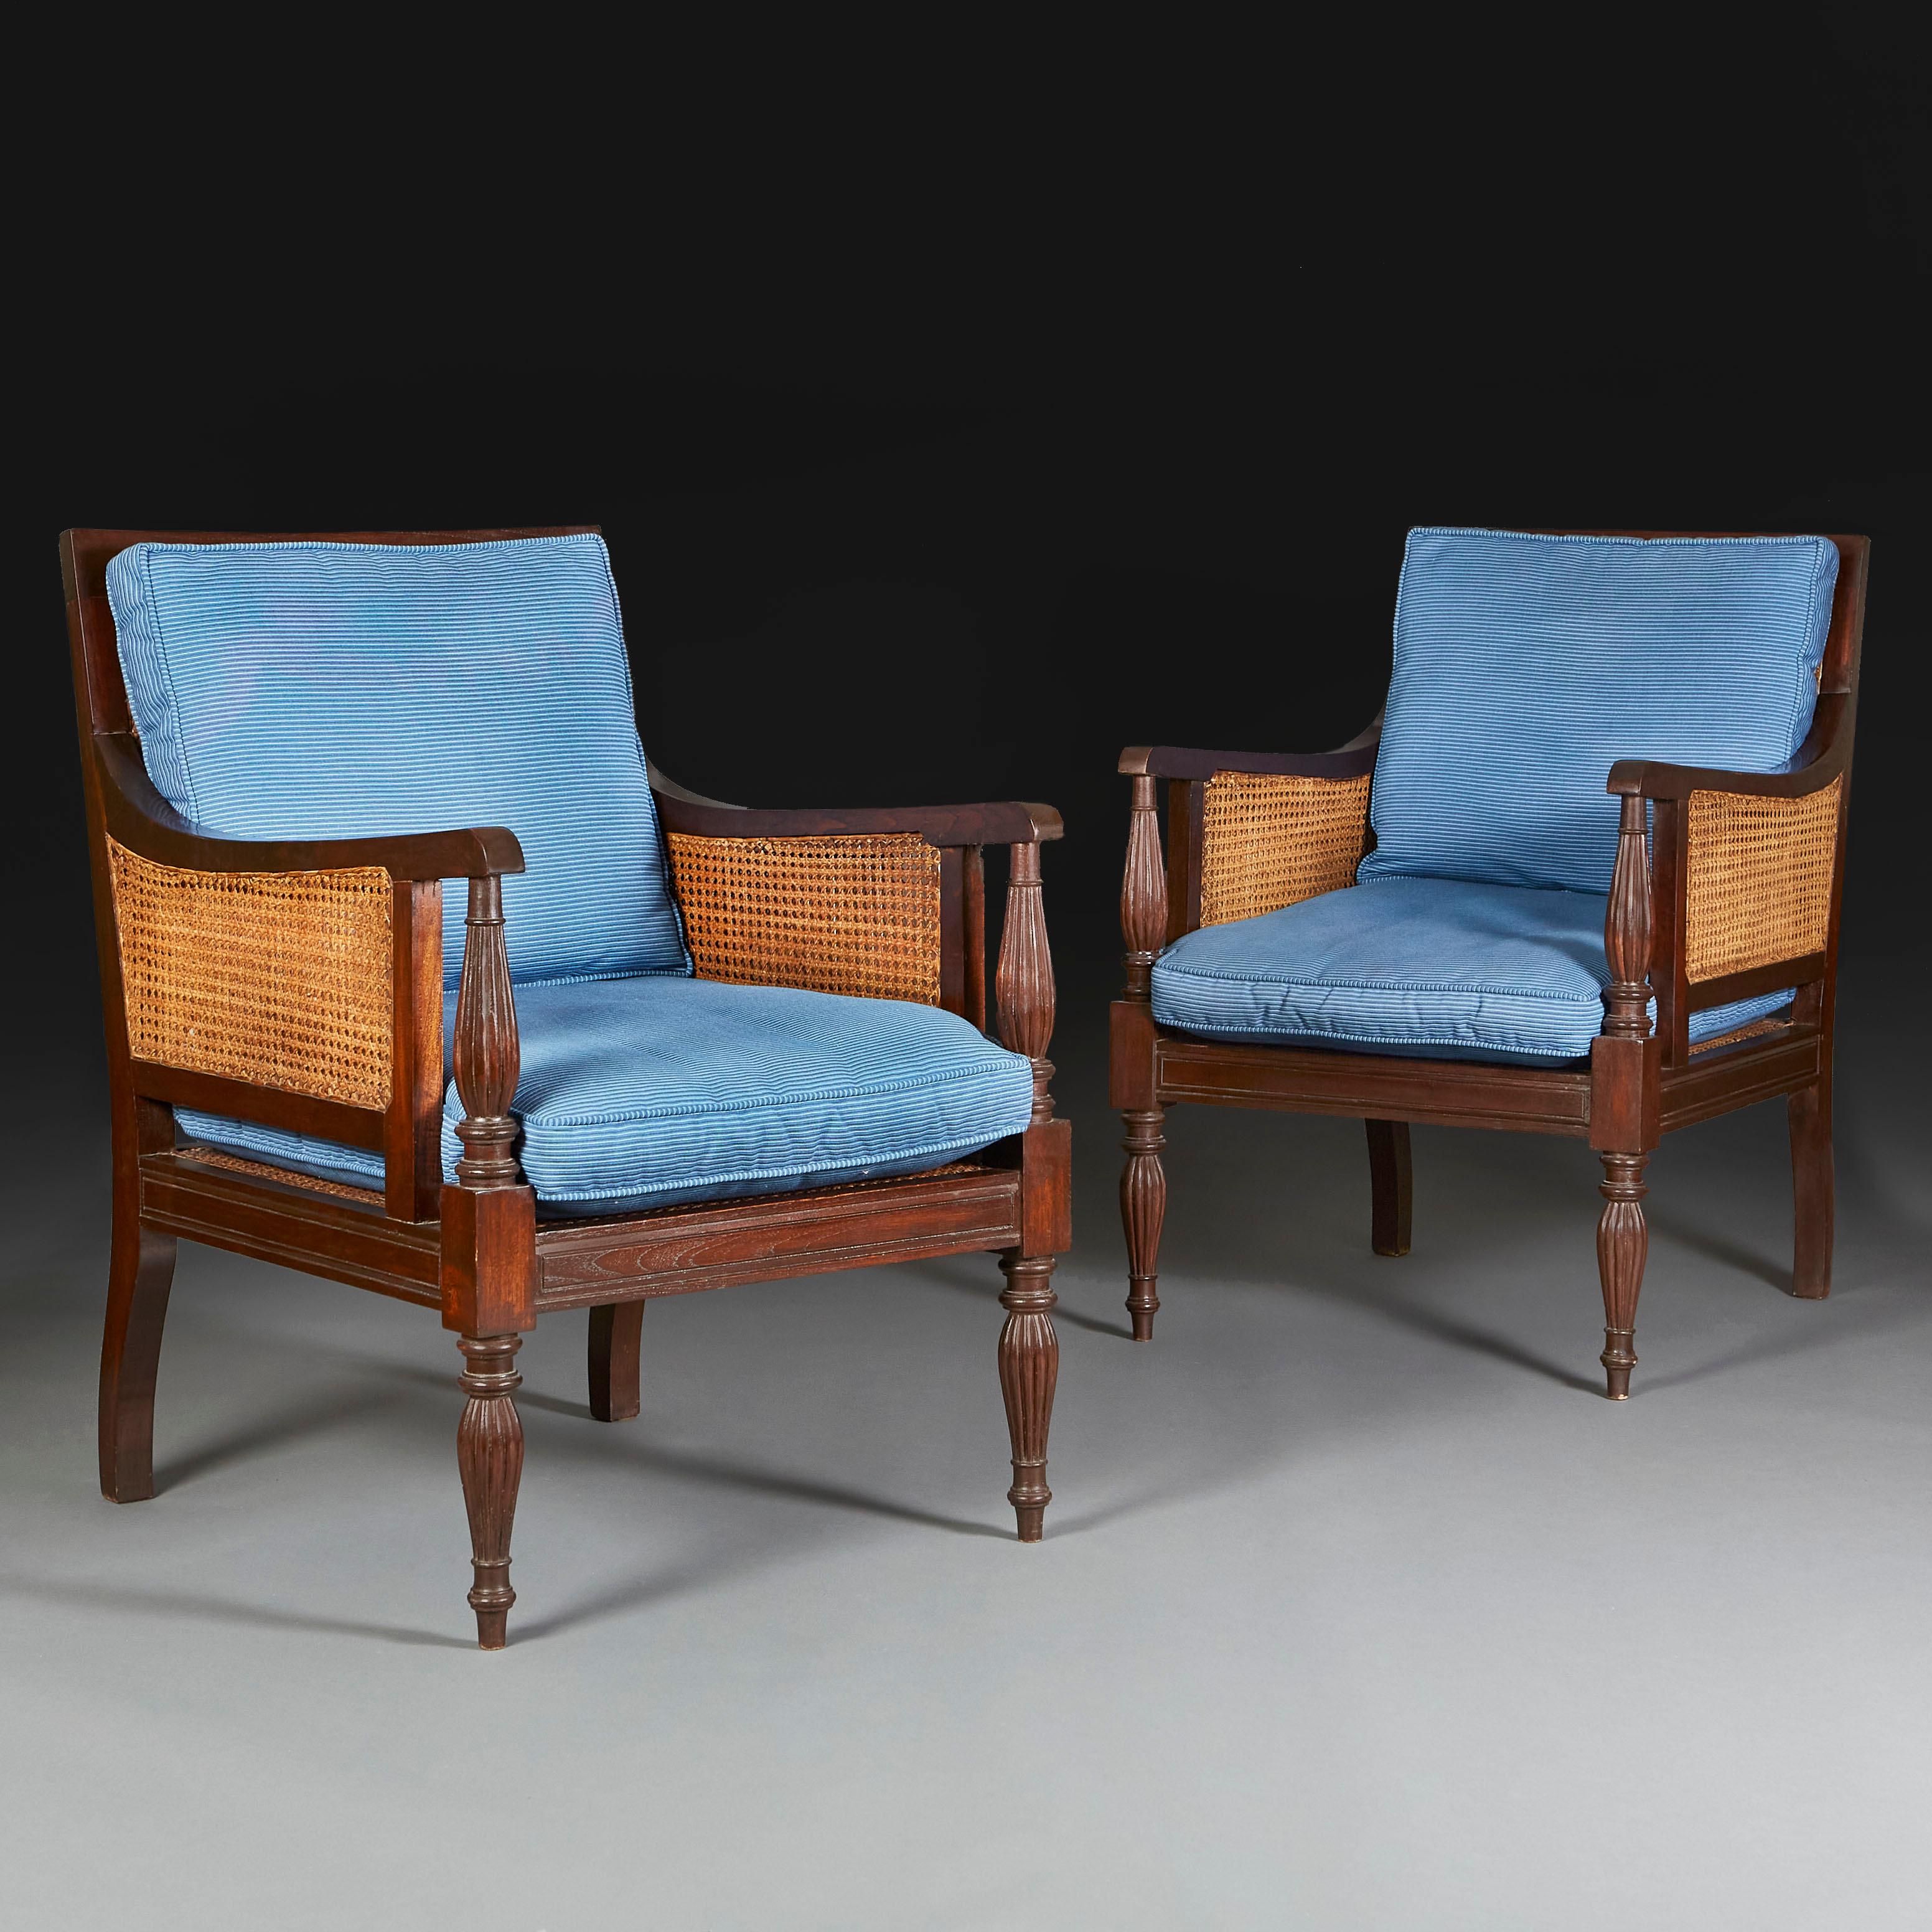 A pair of Regency style library chairs with caned seat and back, with carved arms and turned and gadrooned legs. With seat and back cushions uphlstered in blue corduroy.